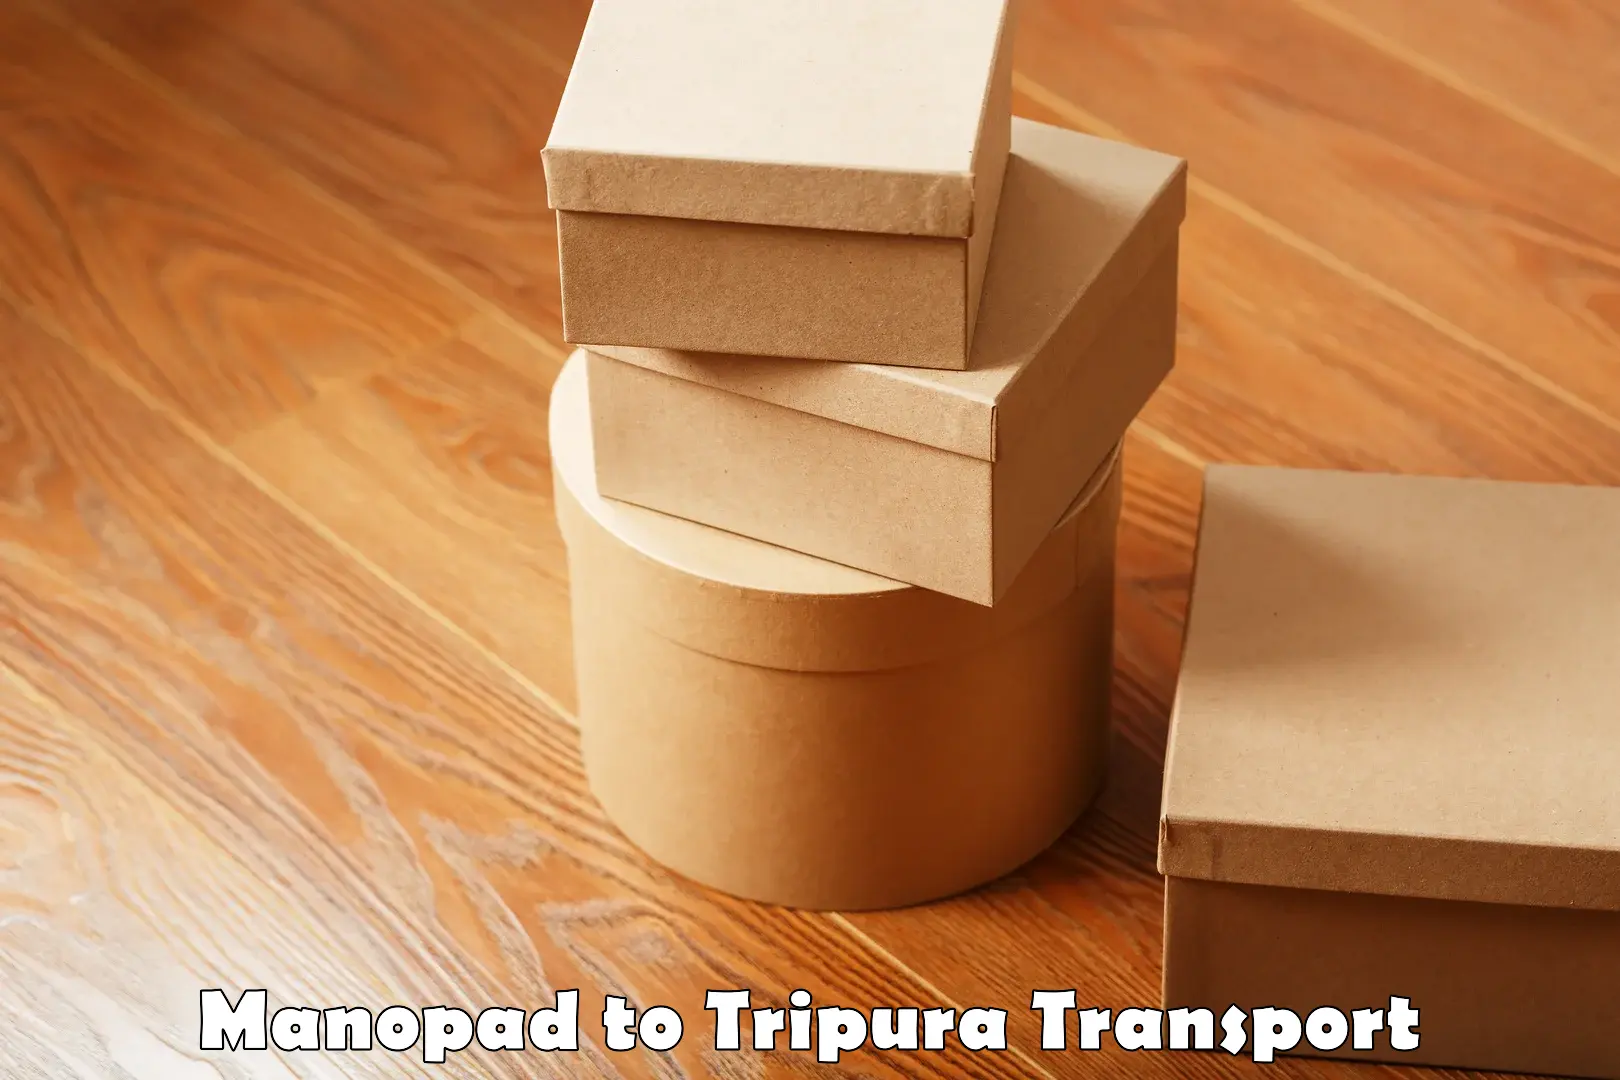 Delivery service Manopad to Udaipur Tripura